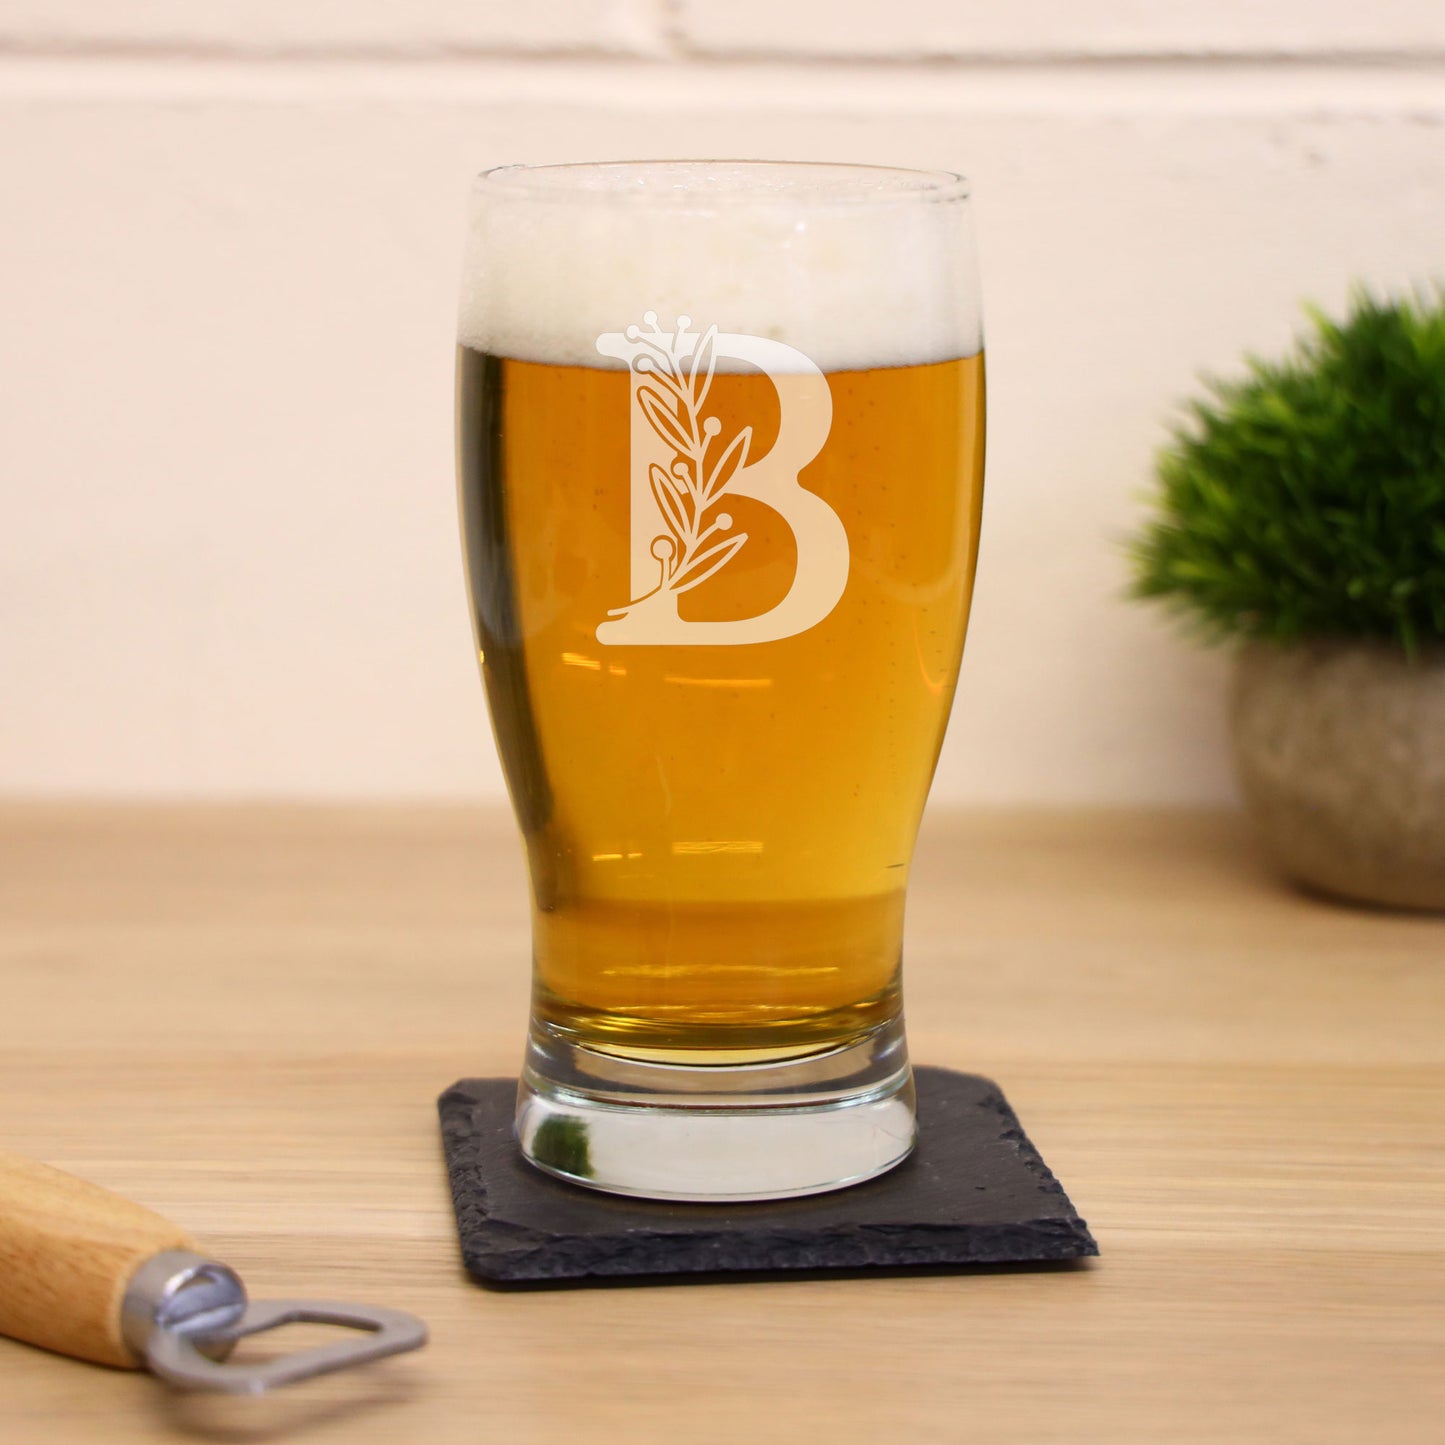 Monogram Engraved Beer Pint Glass and/or Coaster Set  - Always Looking Good - Glass & Square Coaster Set  